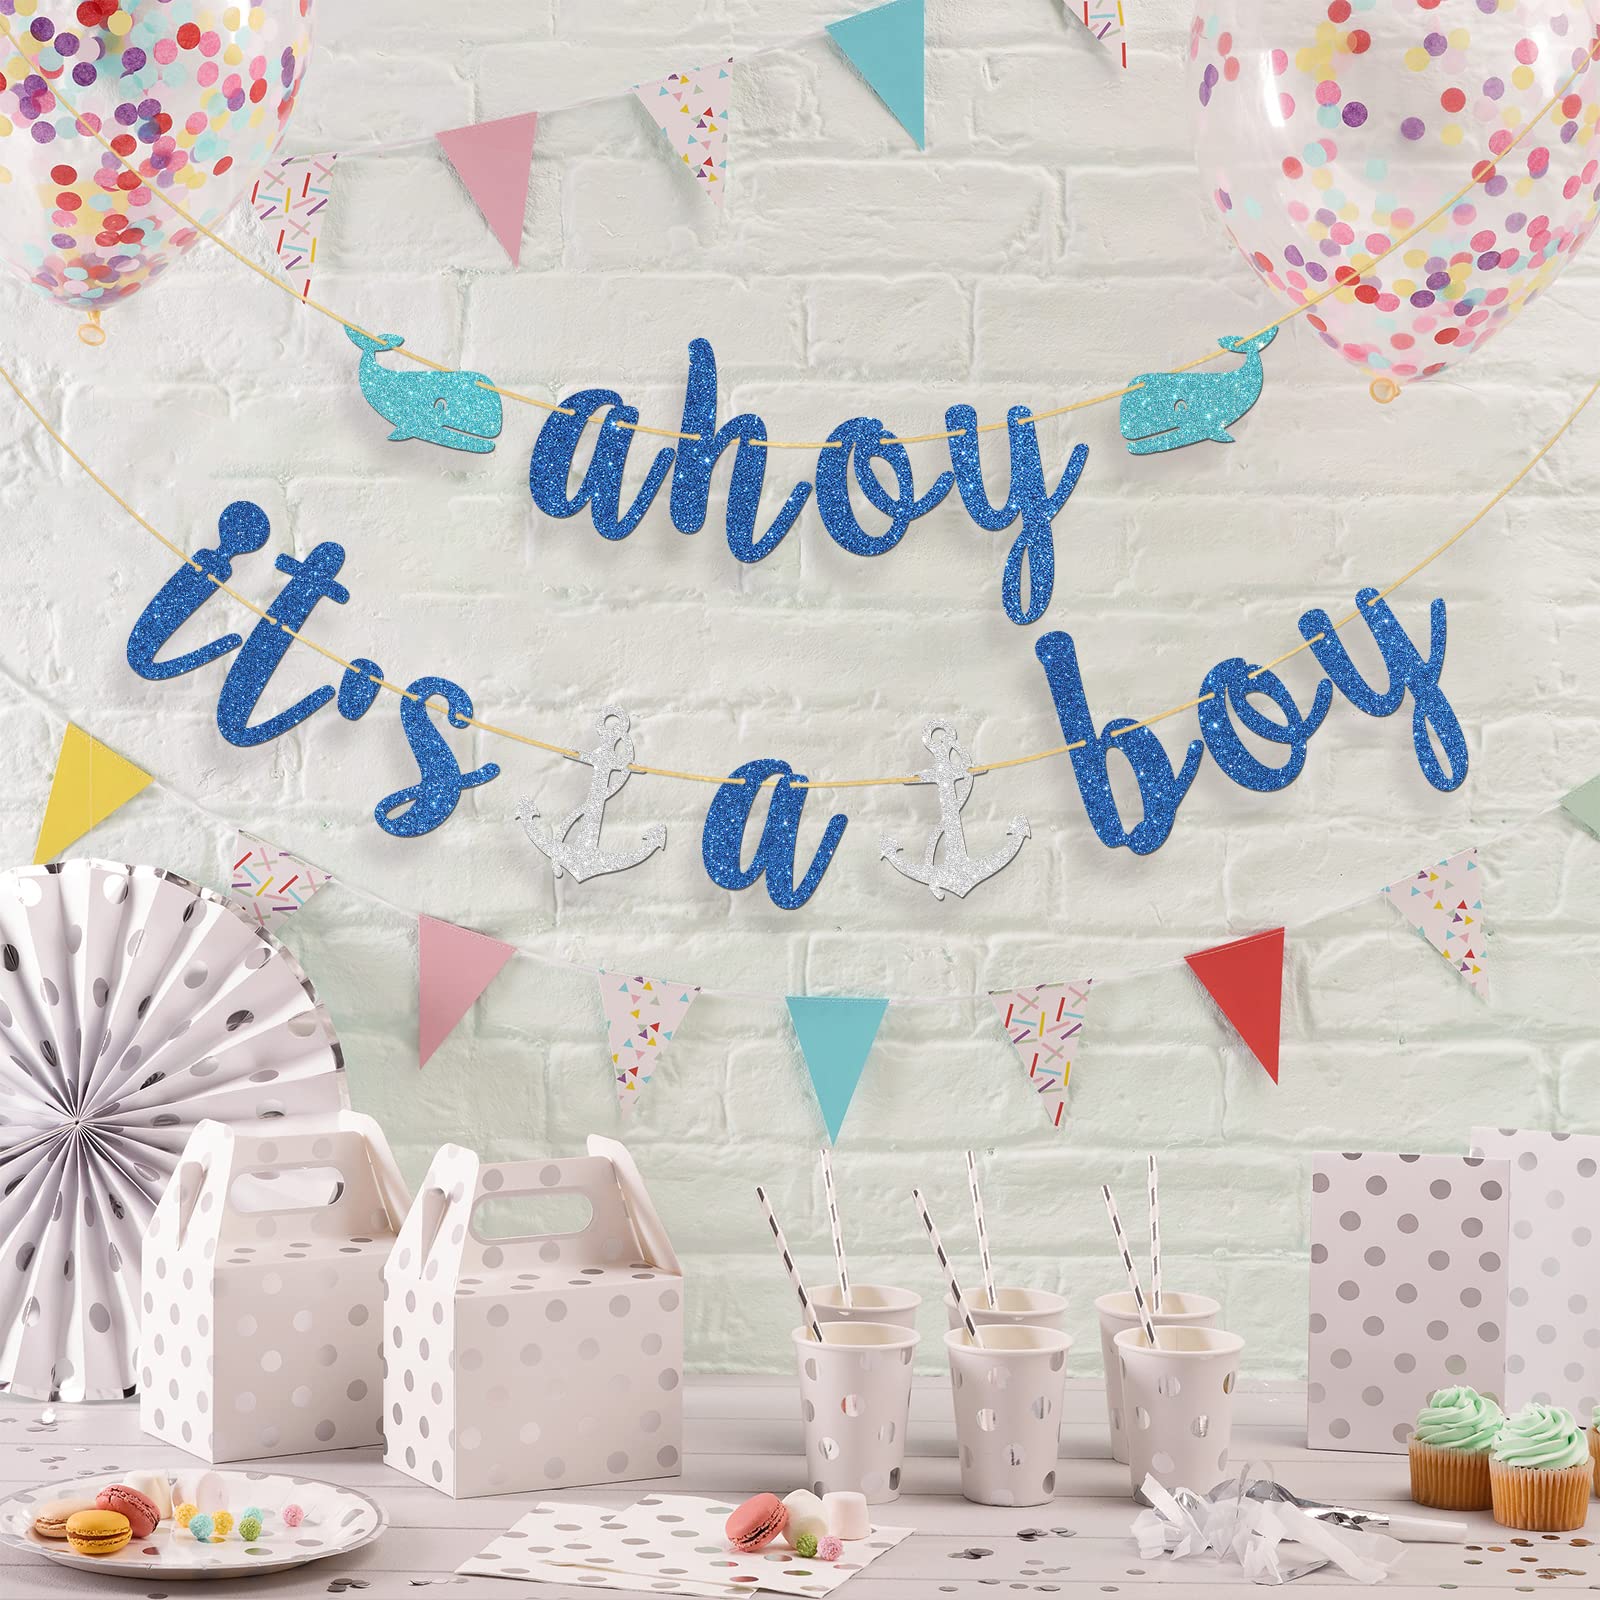 Halawawa Blue Glitter Ahoy It's a Boy Banner - Nautical Theme Baby Shower/Gender Reveal Party Decoration Banner - Welcome Baby Boy, Boy Gender Reveal, 1st Birthday Party Decors for Boys